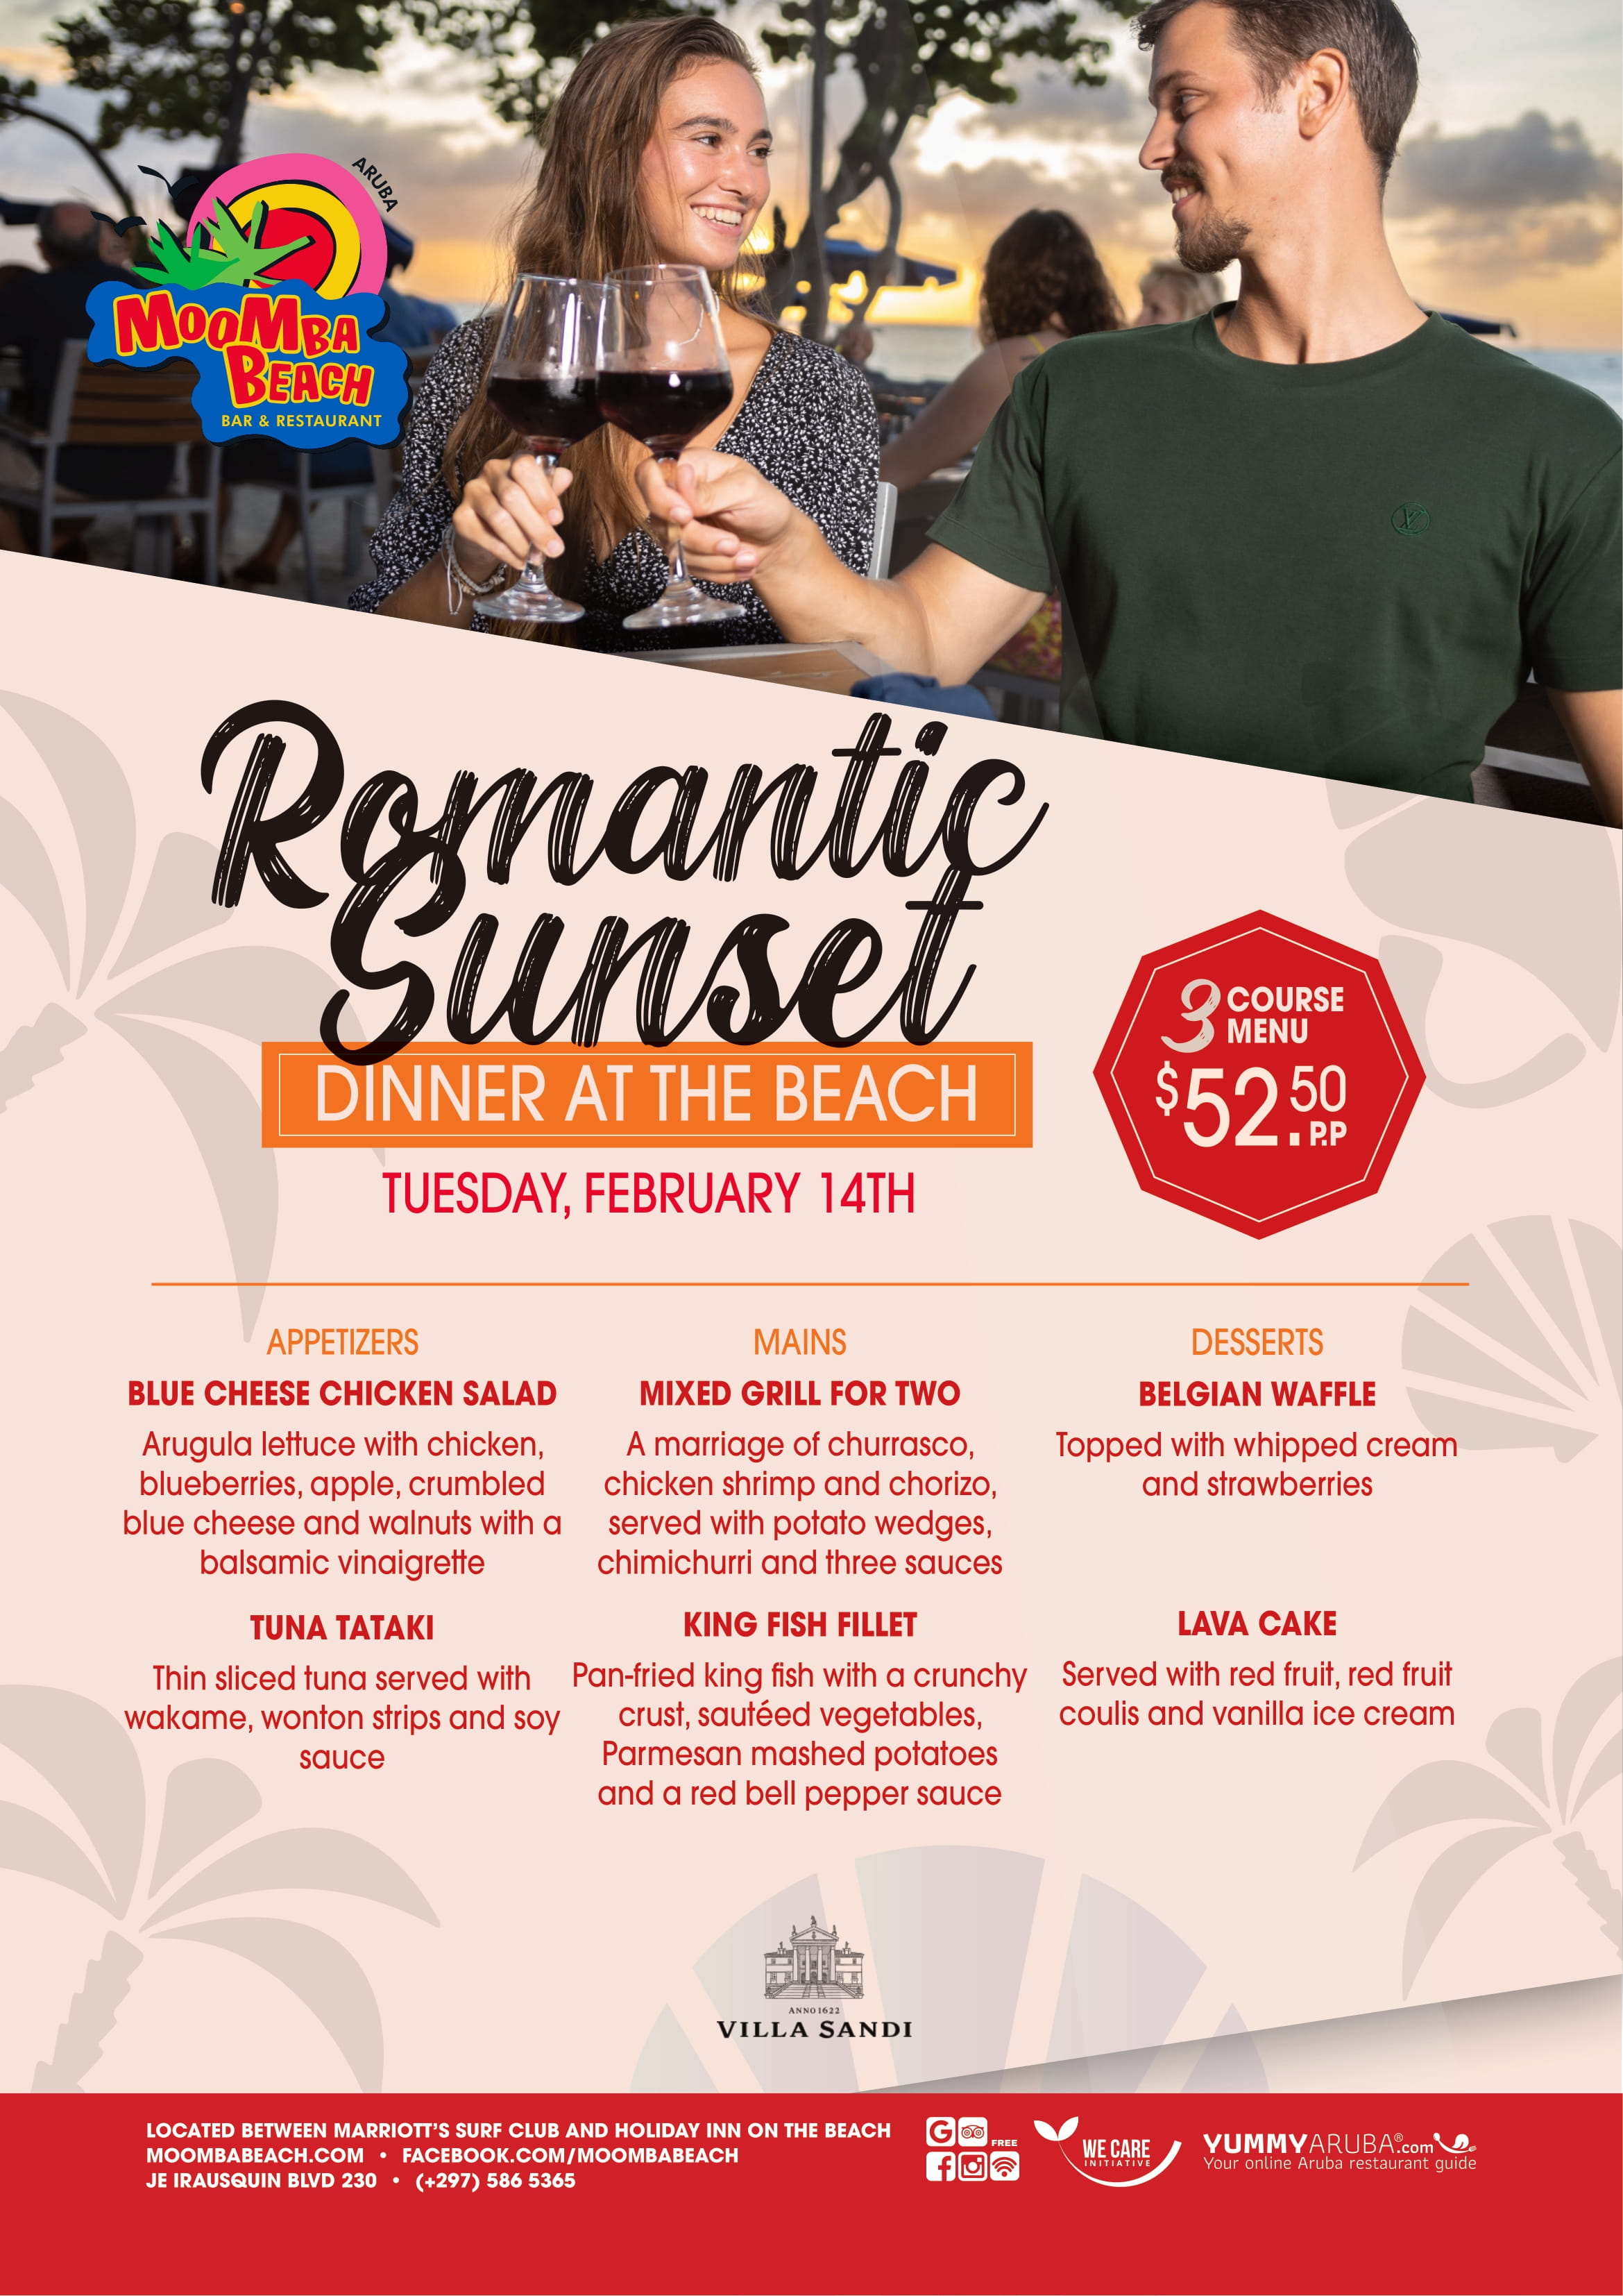  This romantic sunset getaway at the open-air seaside restaurant of MooMba Beach